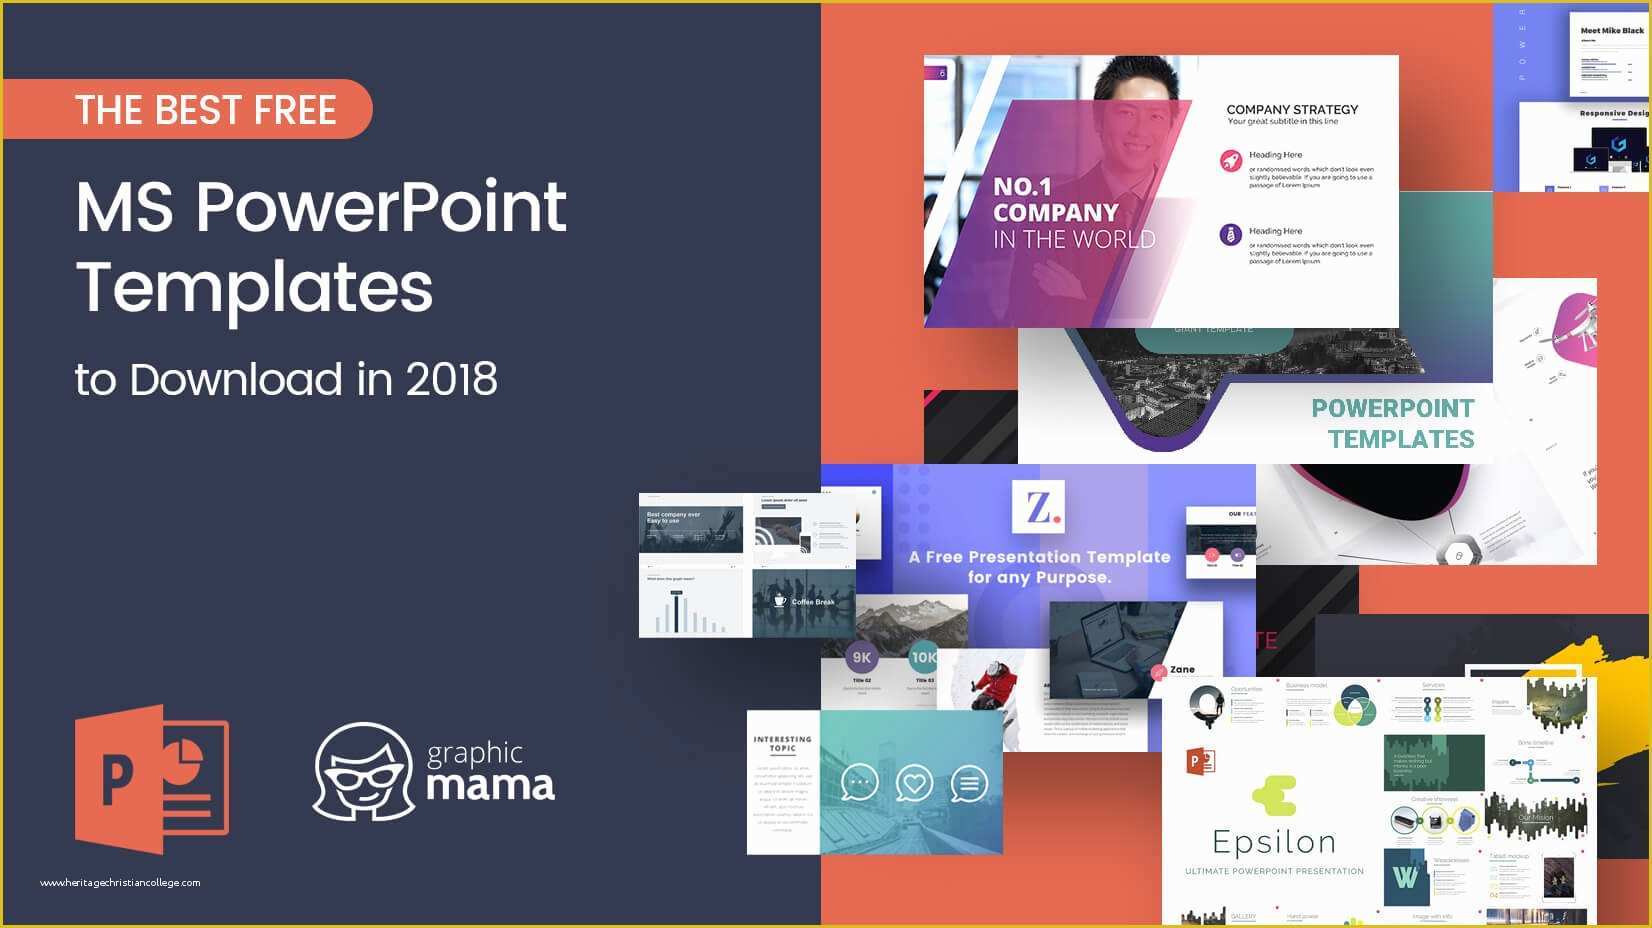 Professional Powerpoint Templates Free Download Of the Best Free Powerpoint Templates to Download In 2018